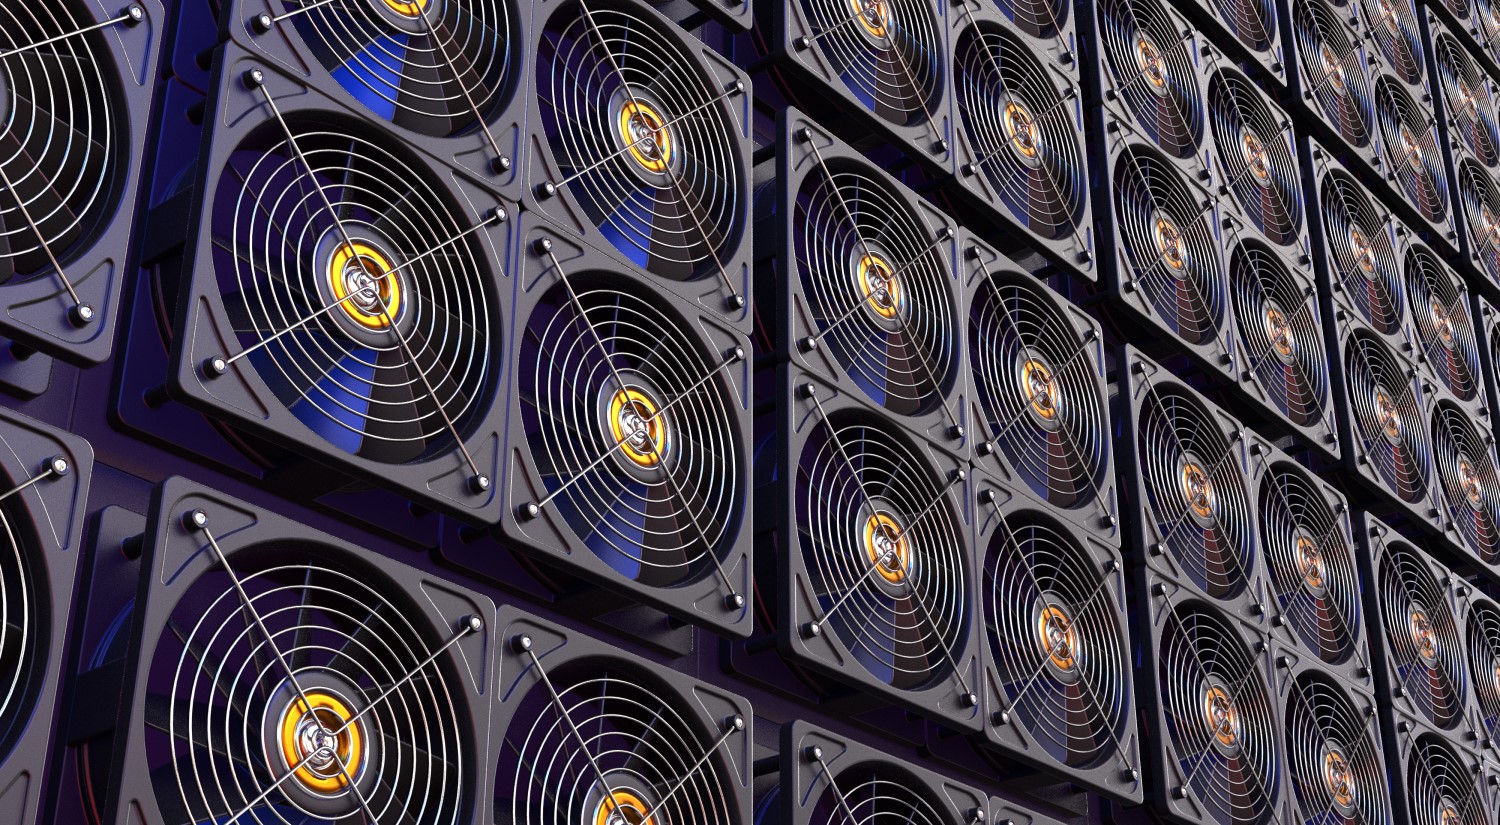 Next Bitcoin Halving Could Squeeze Out Retail Miners, But Jury’s Split On Price